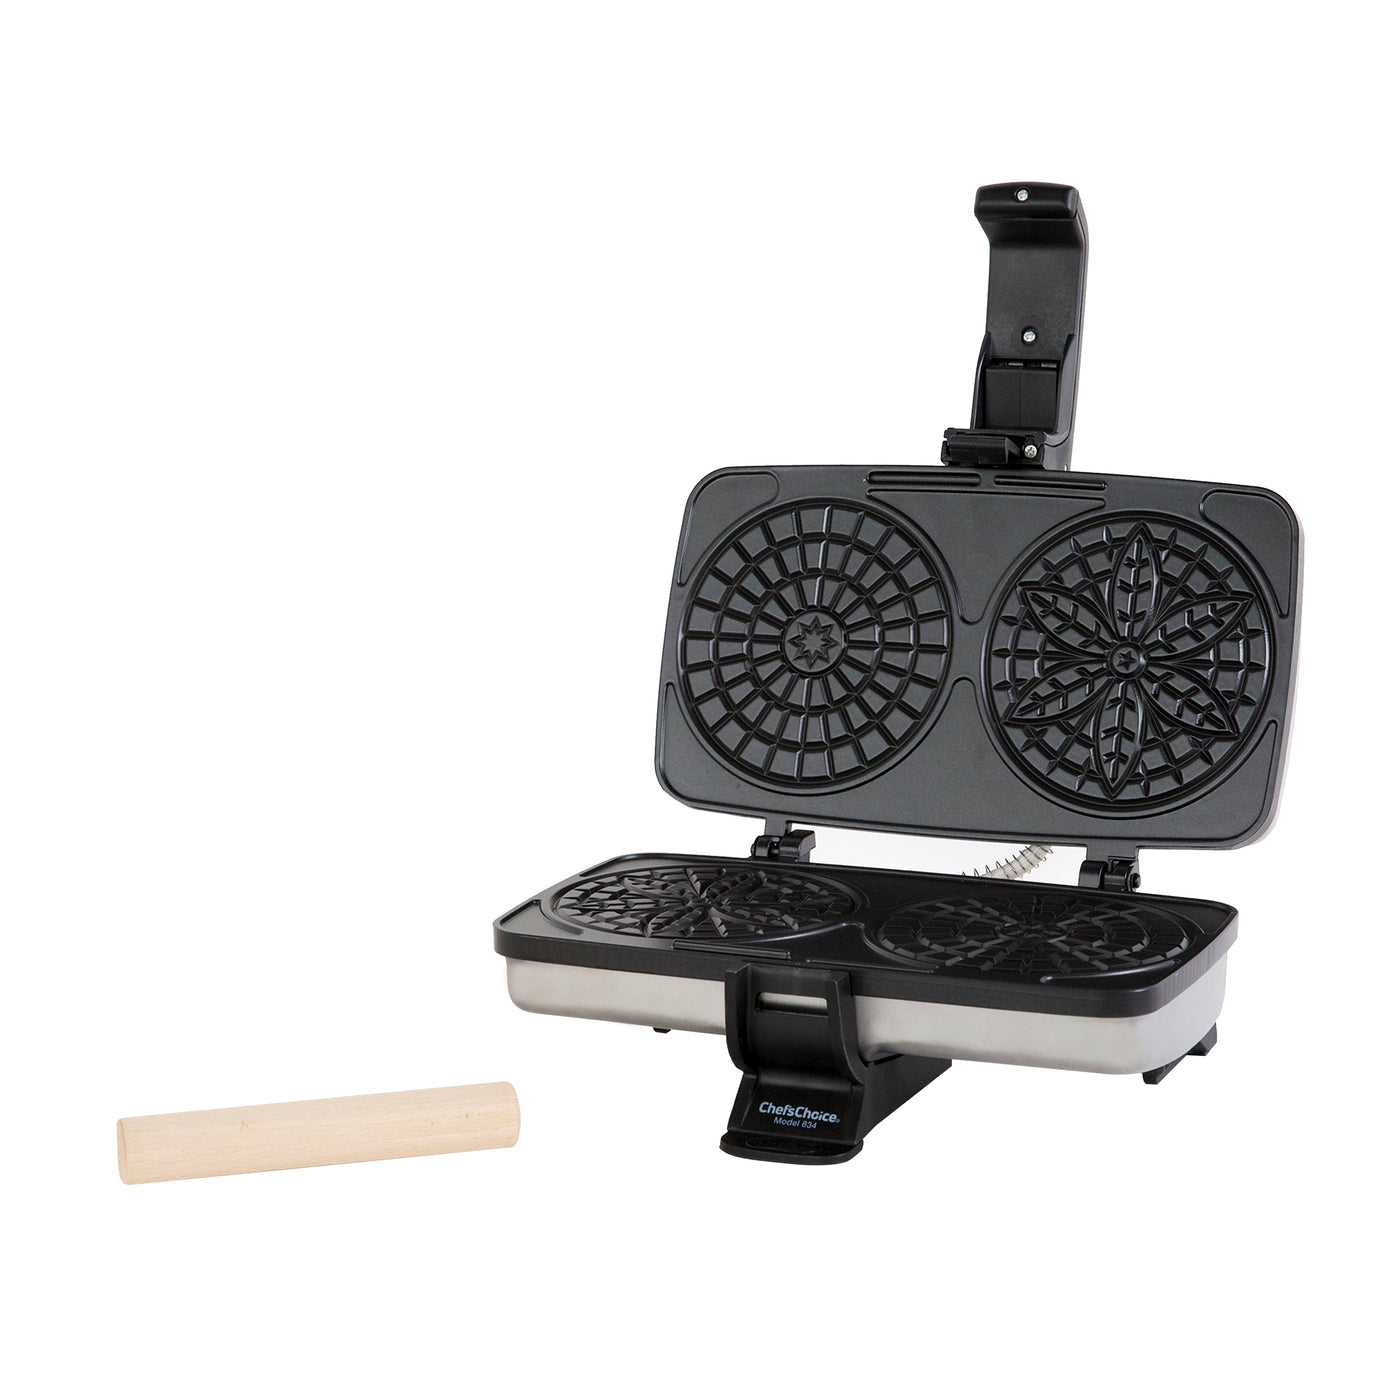 The Chef'sChoice Toscano pizzelle maker will cook two beautiful